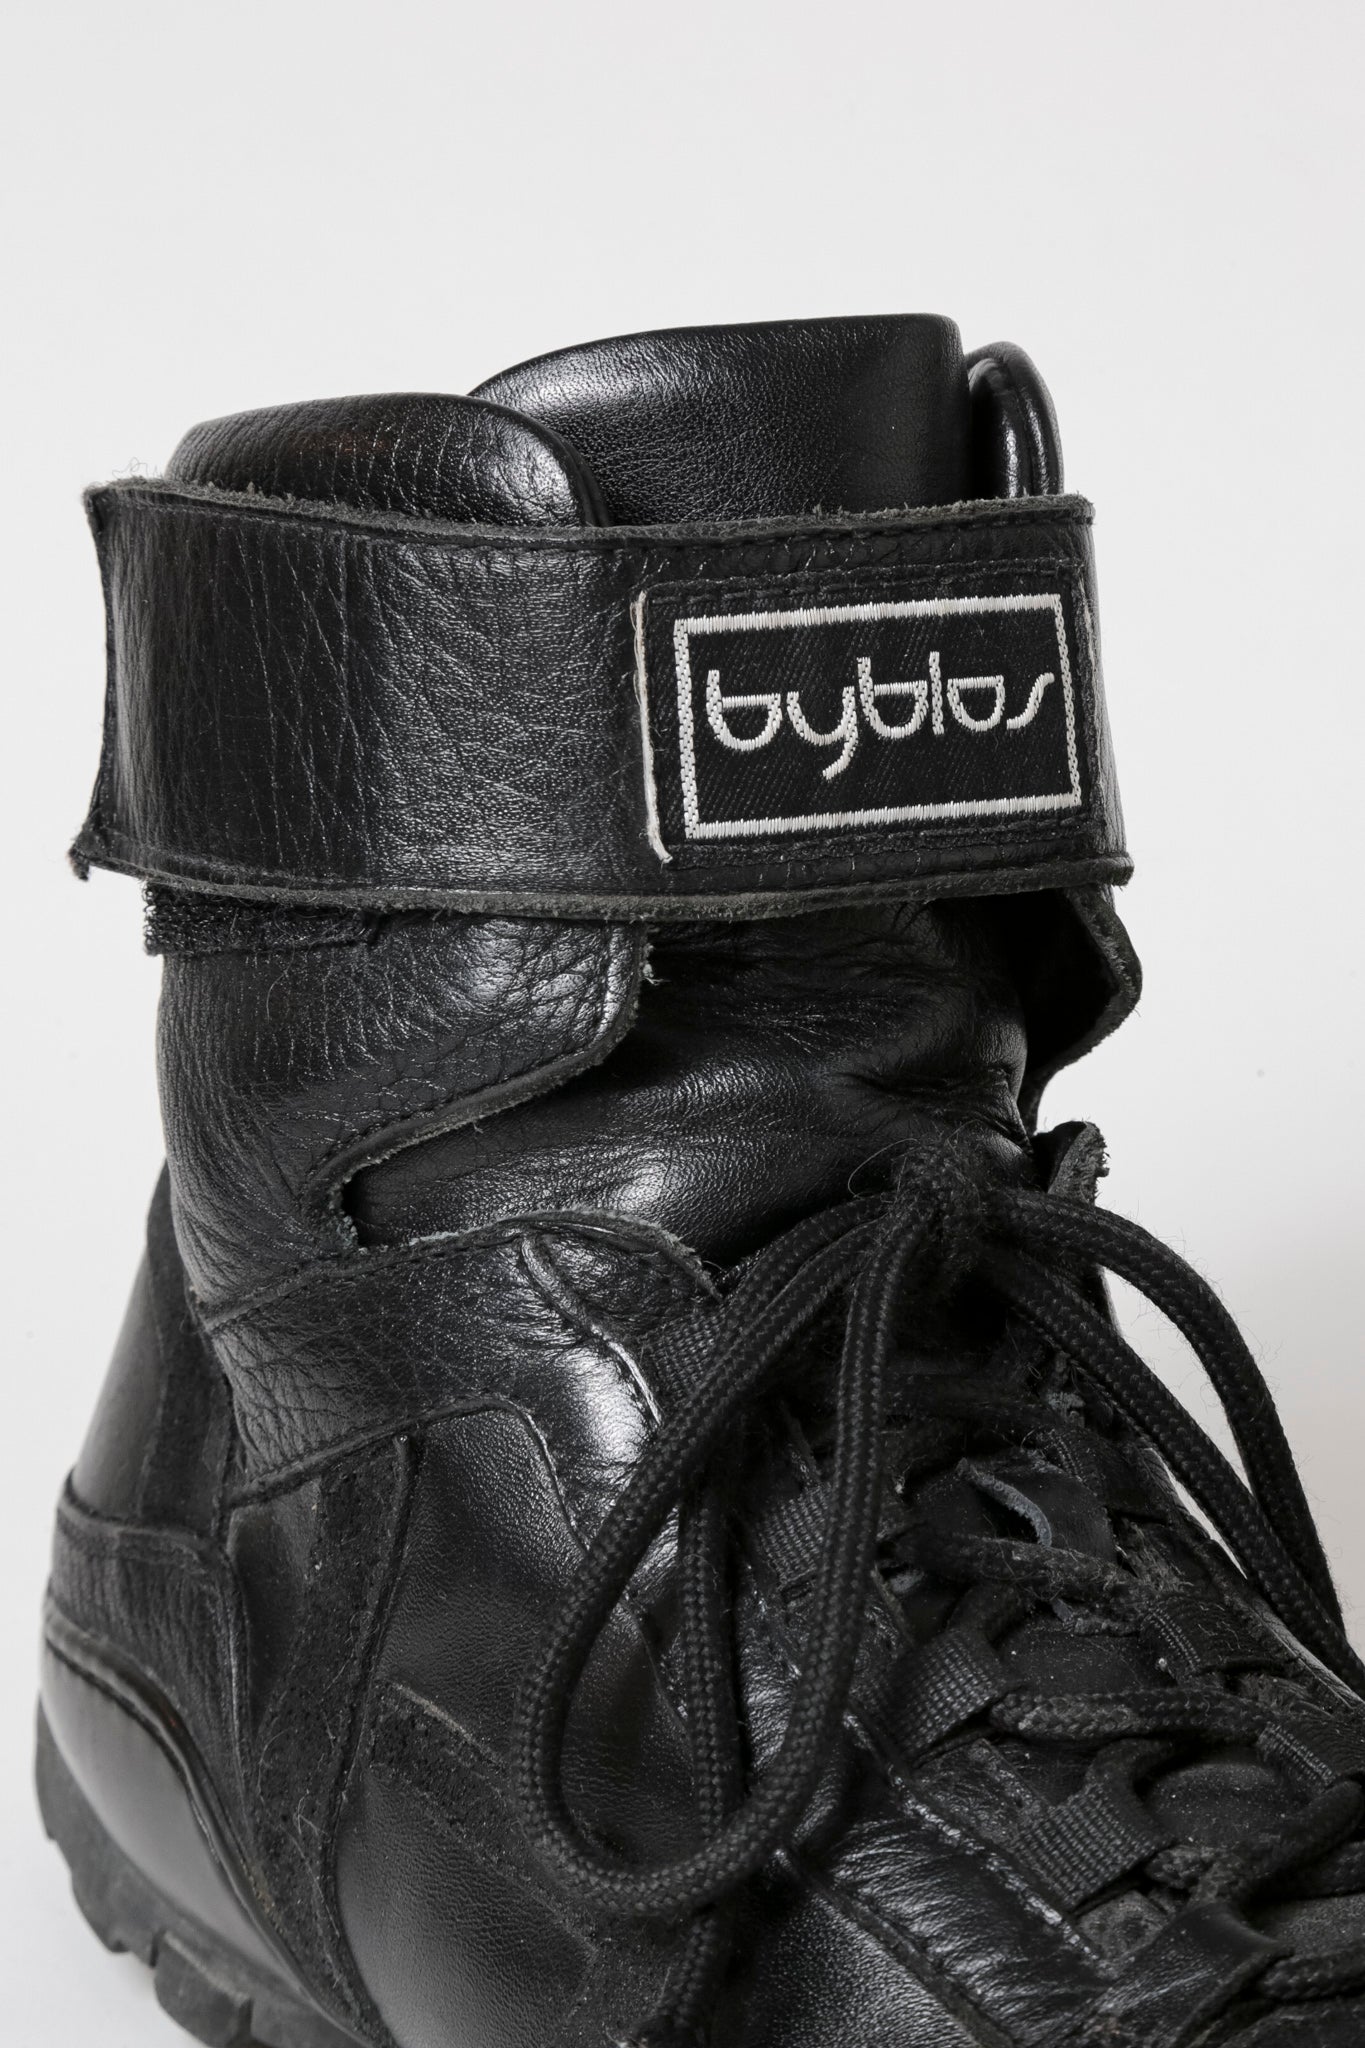 Byblos Leather Boxing Boots